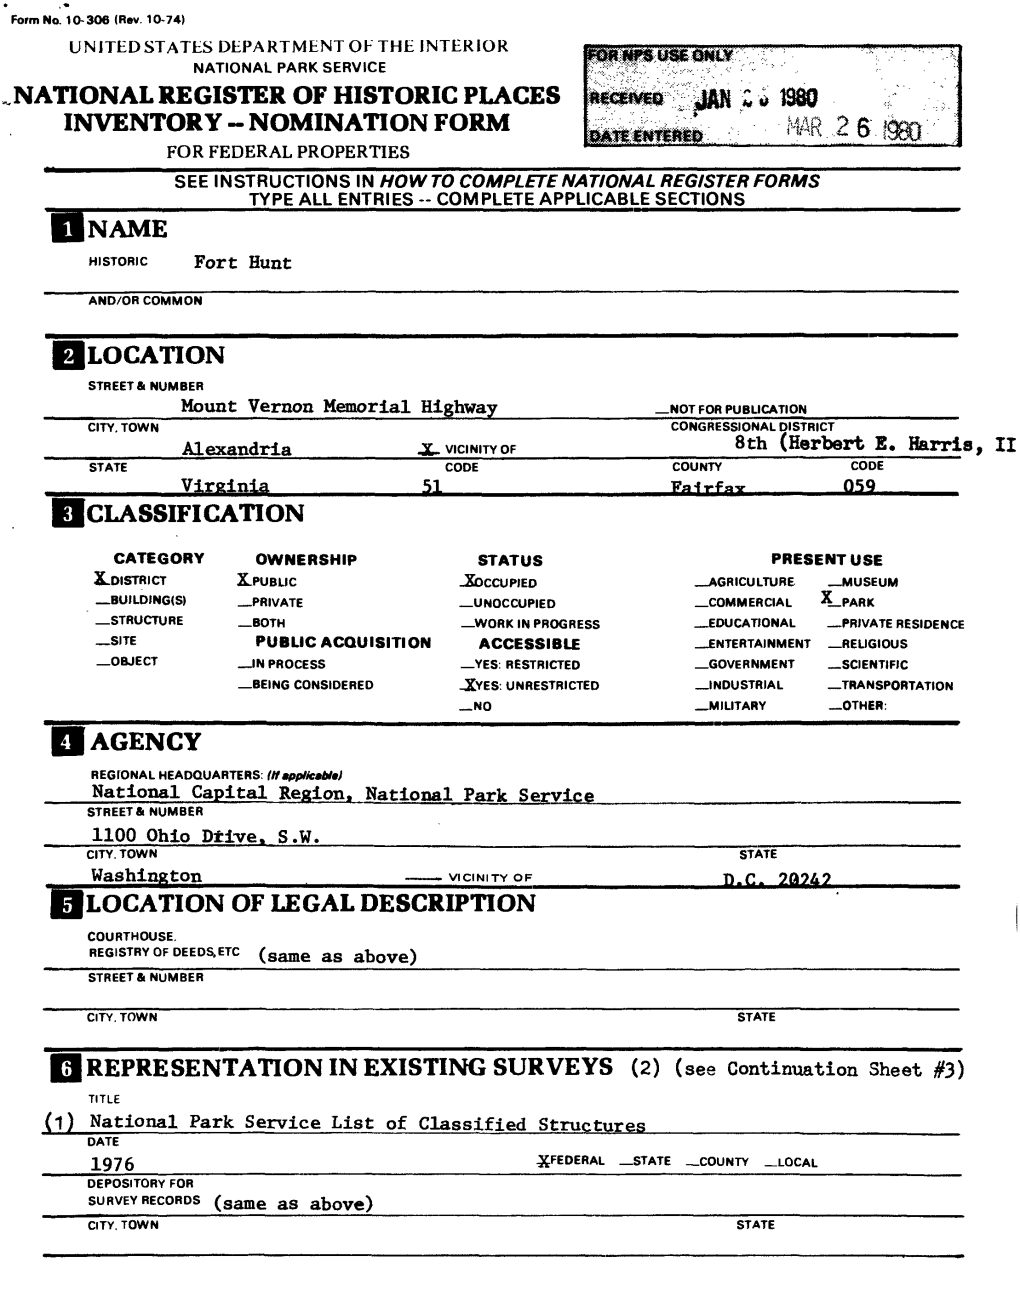 National Register of Historic Places Inventory - Nomination Form 2 5